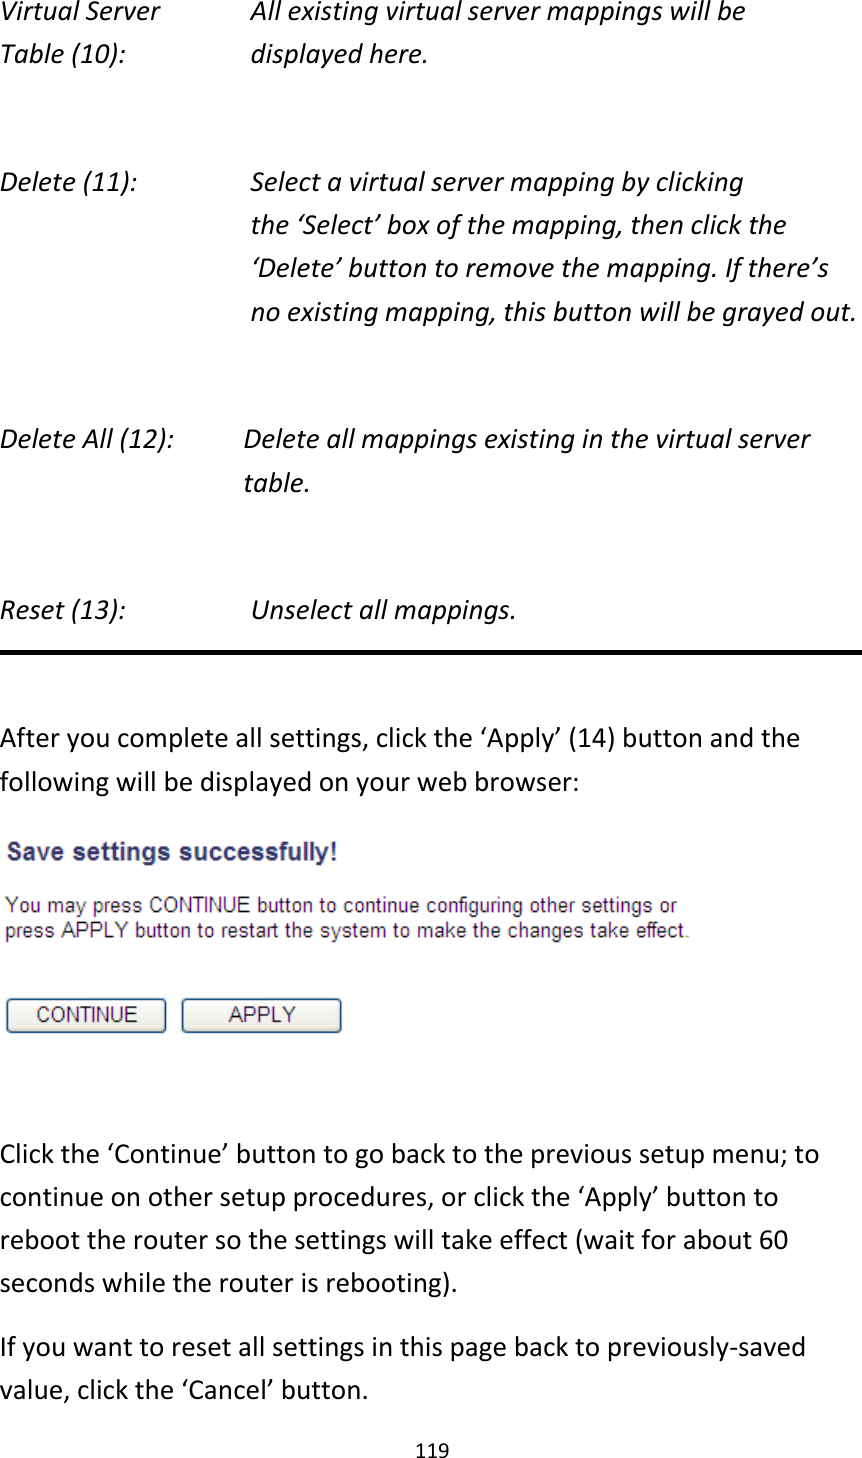 119 Virtual Server      All existing virtual server mappings will be Table (10):       displayed here.  Delete (11):      Select a virtual server mapping by clicking     the ‘Select’ box of the mapping, then click the ‘Delete’ button to remove the mapping. If there’s no existing mapping, this button will be grayed out.  Delete All (12):    Delete all mappings existing in the virtual server     table.  Reset (13):       Unselect all mappings.  After you complete all settings, click the ‘Apply’ (14) button and the following will be displayed on your web browser:   Click the ‘Continue’ button to go back to the previous setup menu; to continue on other setup procedures, or click the ‘Apply’ button to reboot the router so the settings will take effect (wait for about 60 seconds while the router is rebooting). If you want to reset all settings in this page back to previously-saved value, click the ‘Cancel’ button. 